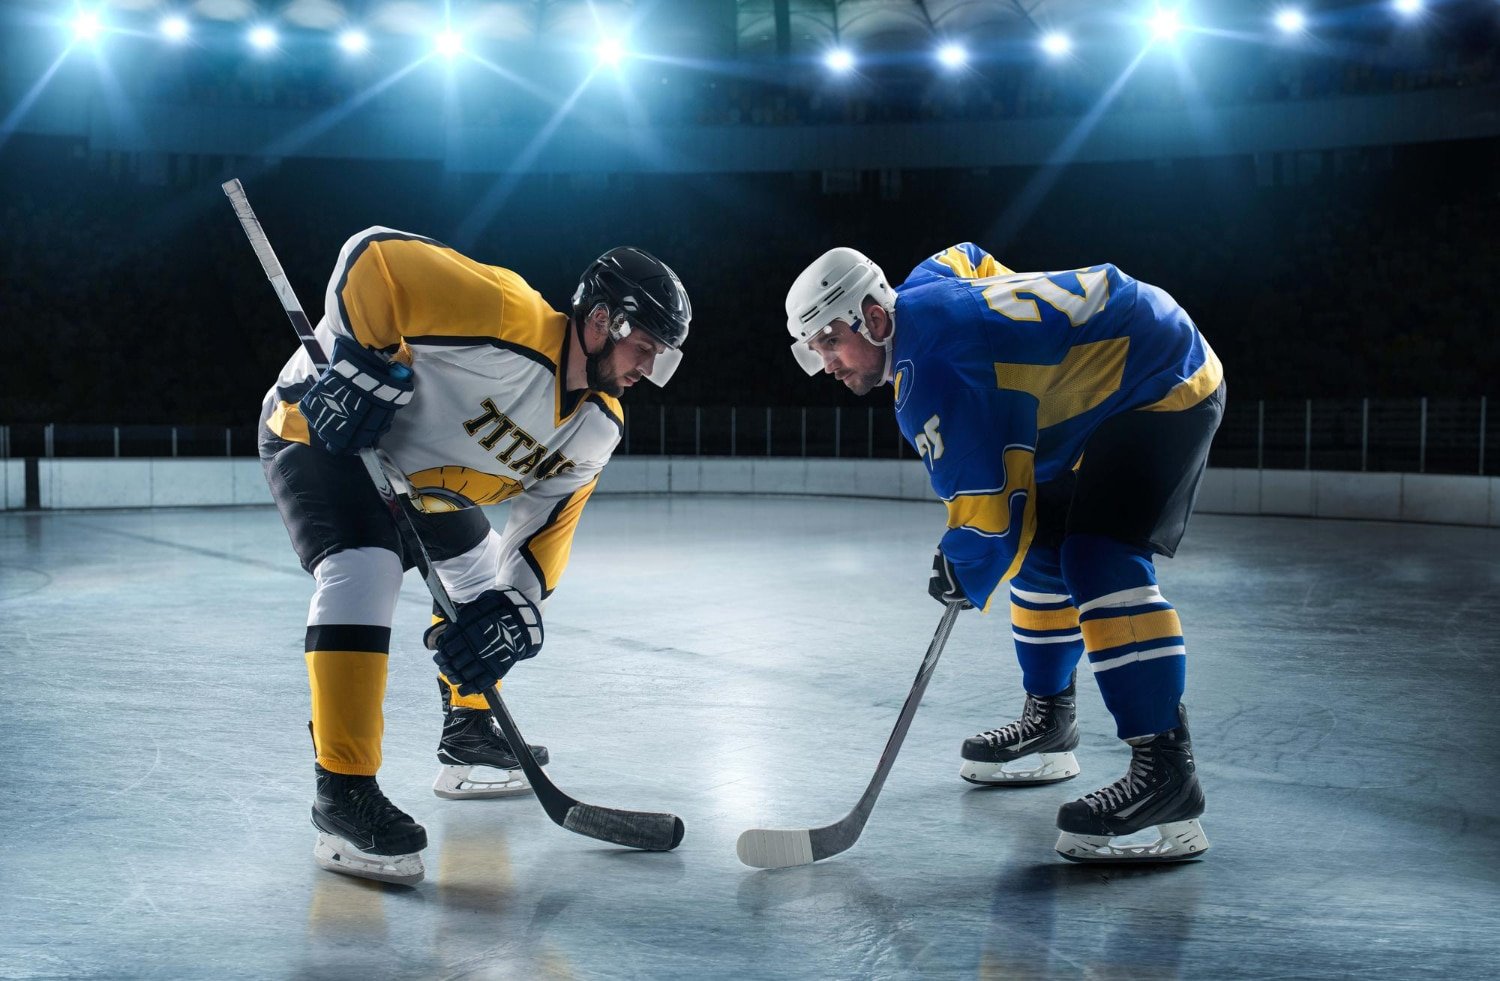 Gear Up For The Game With Pro Hockey Life’s Latest Equipment